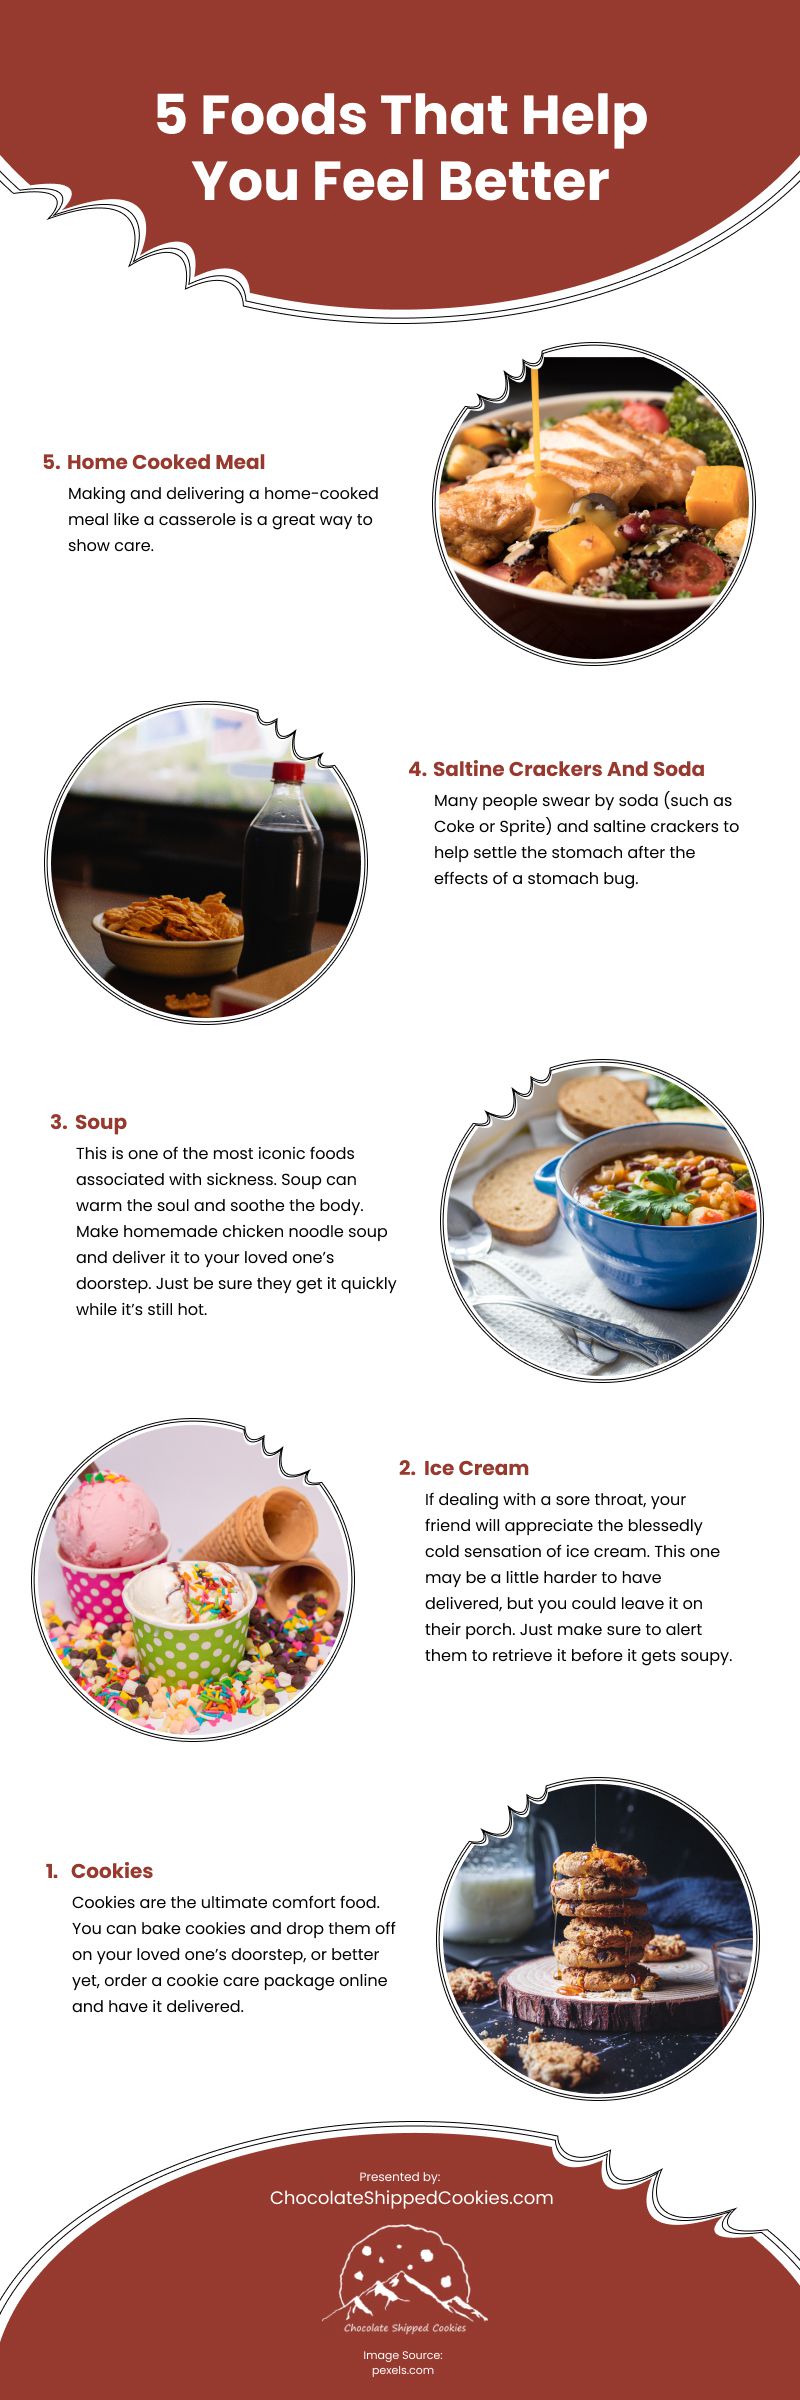 5 Foods That Help You Feel Better Infographic